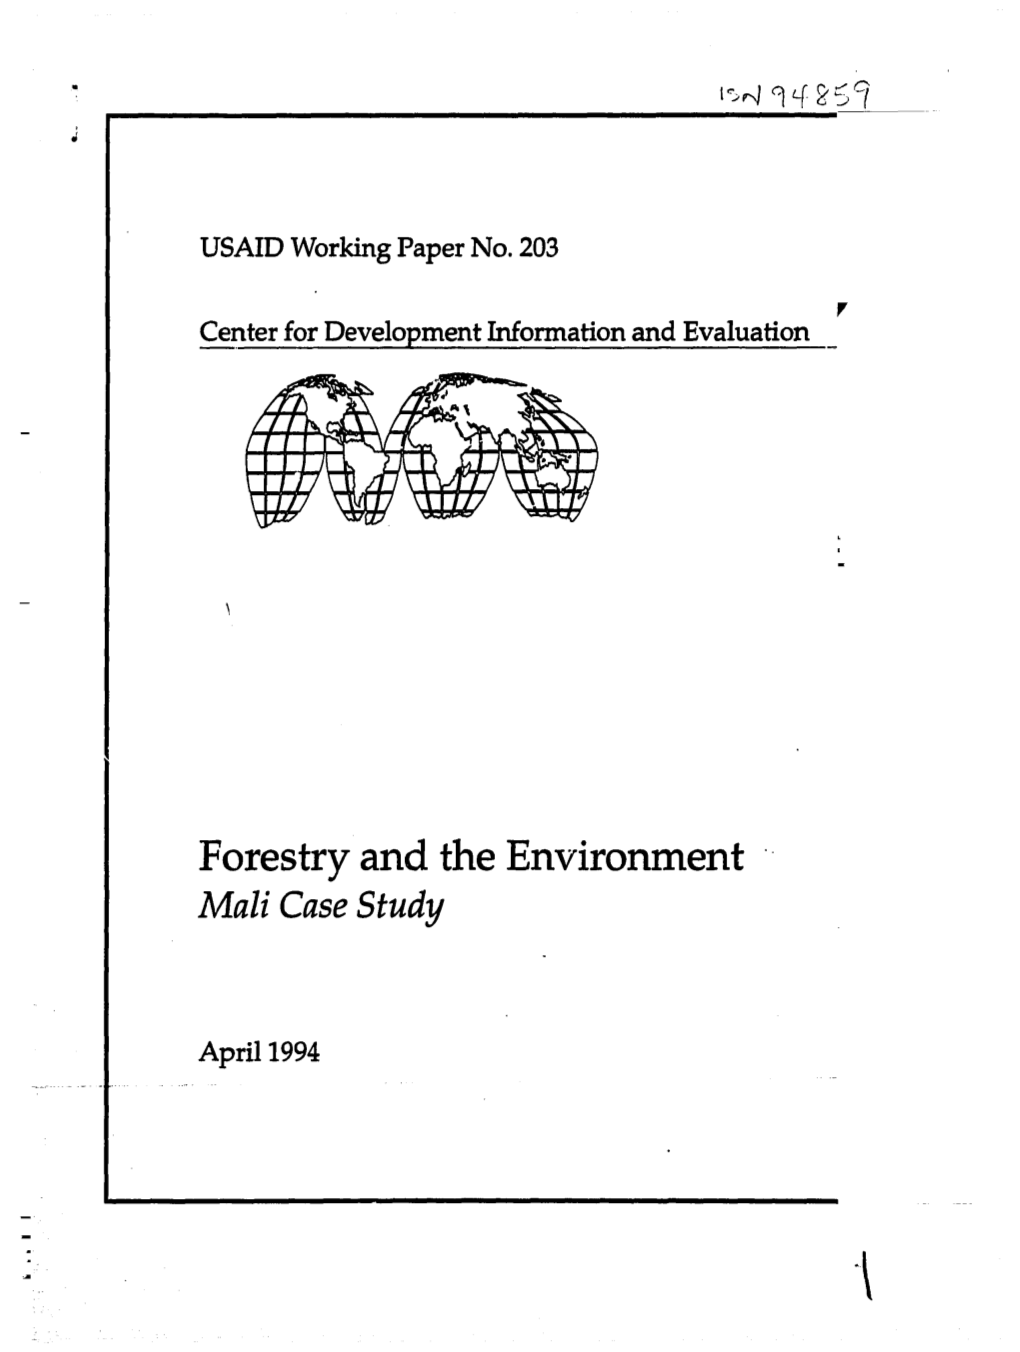 Forestry and the Environment Mali Case Study